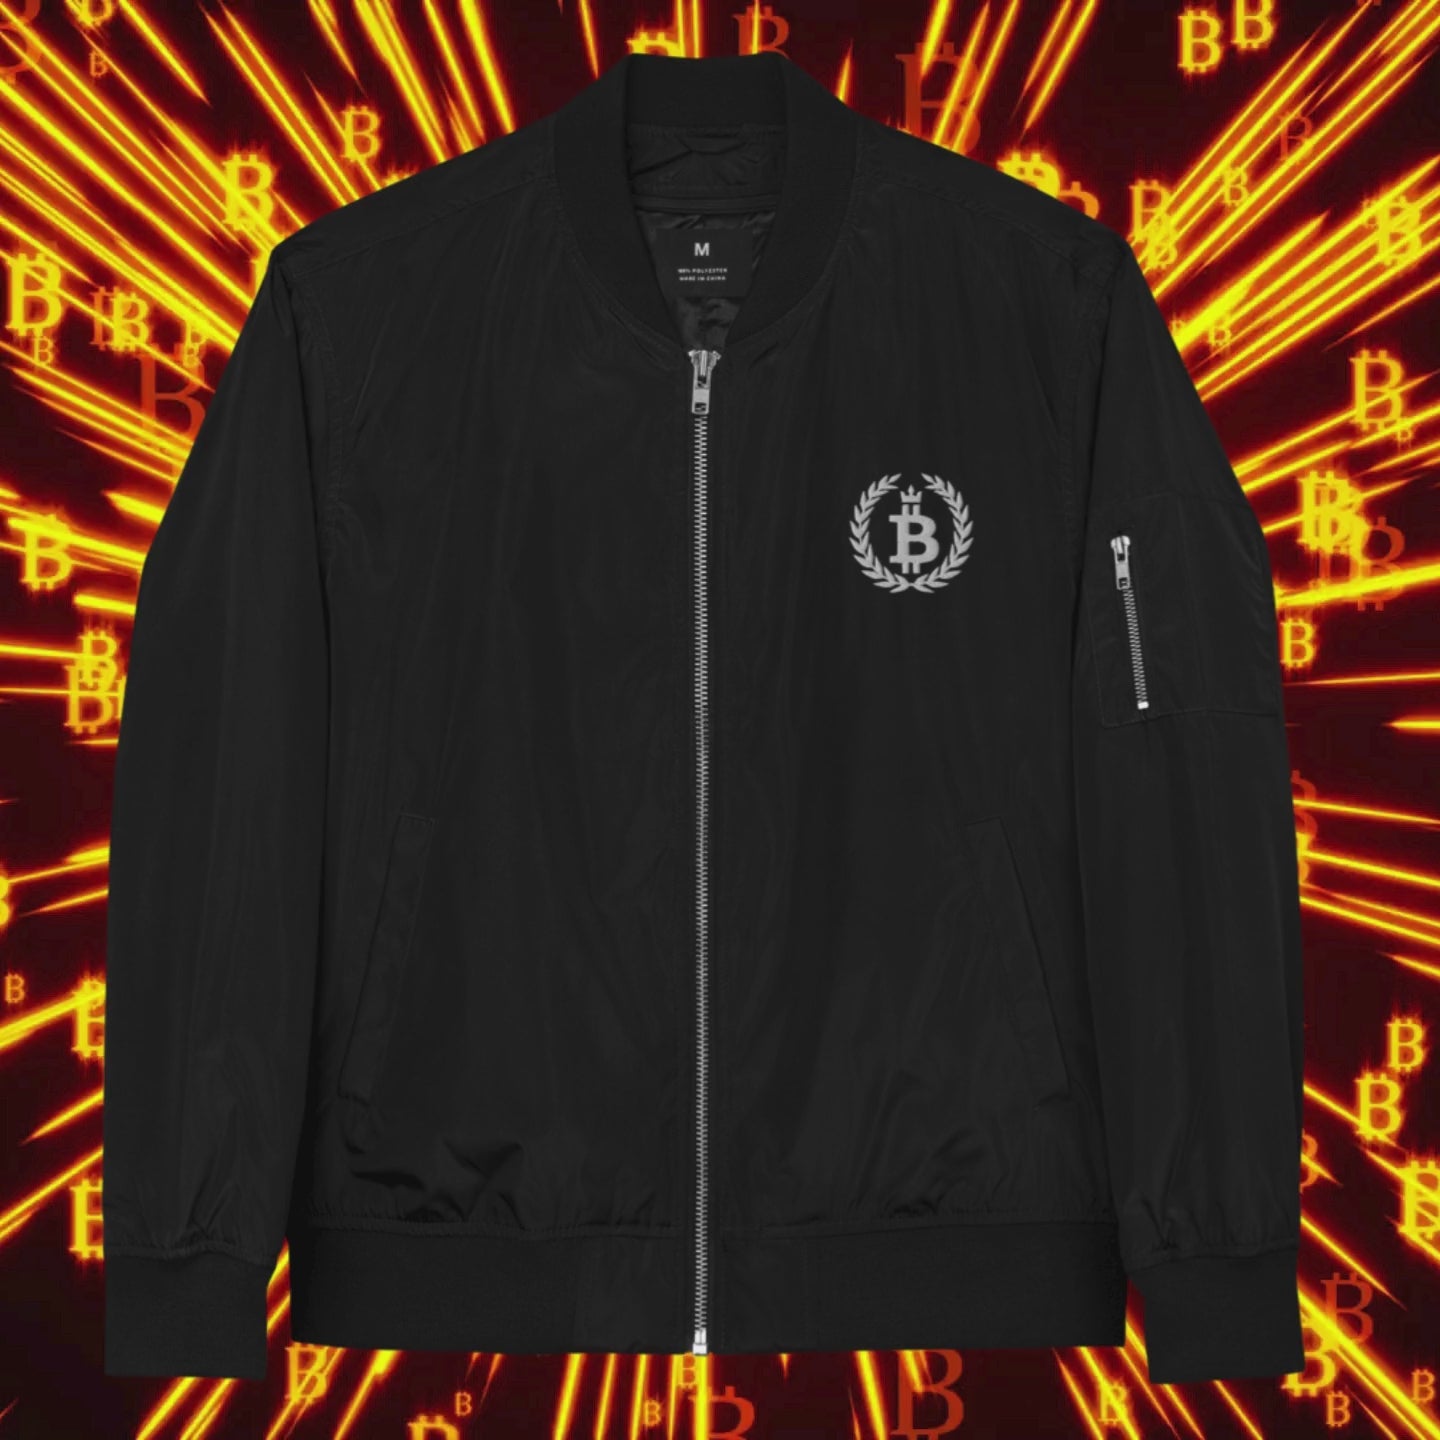 Bitcoin Dominance Bomber Jacket. Video showing print on both sides. Available at NEONCRYPTO STORE.